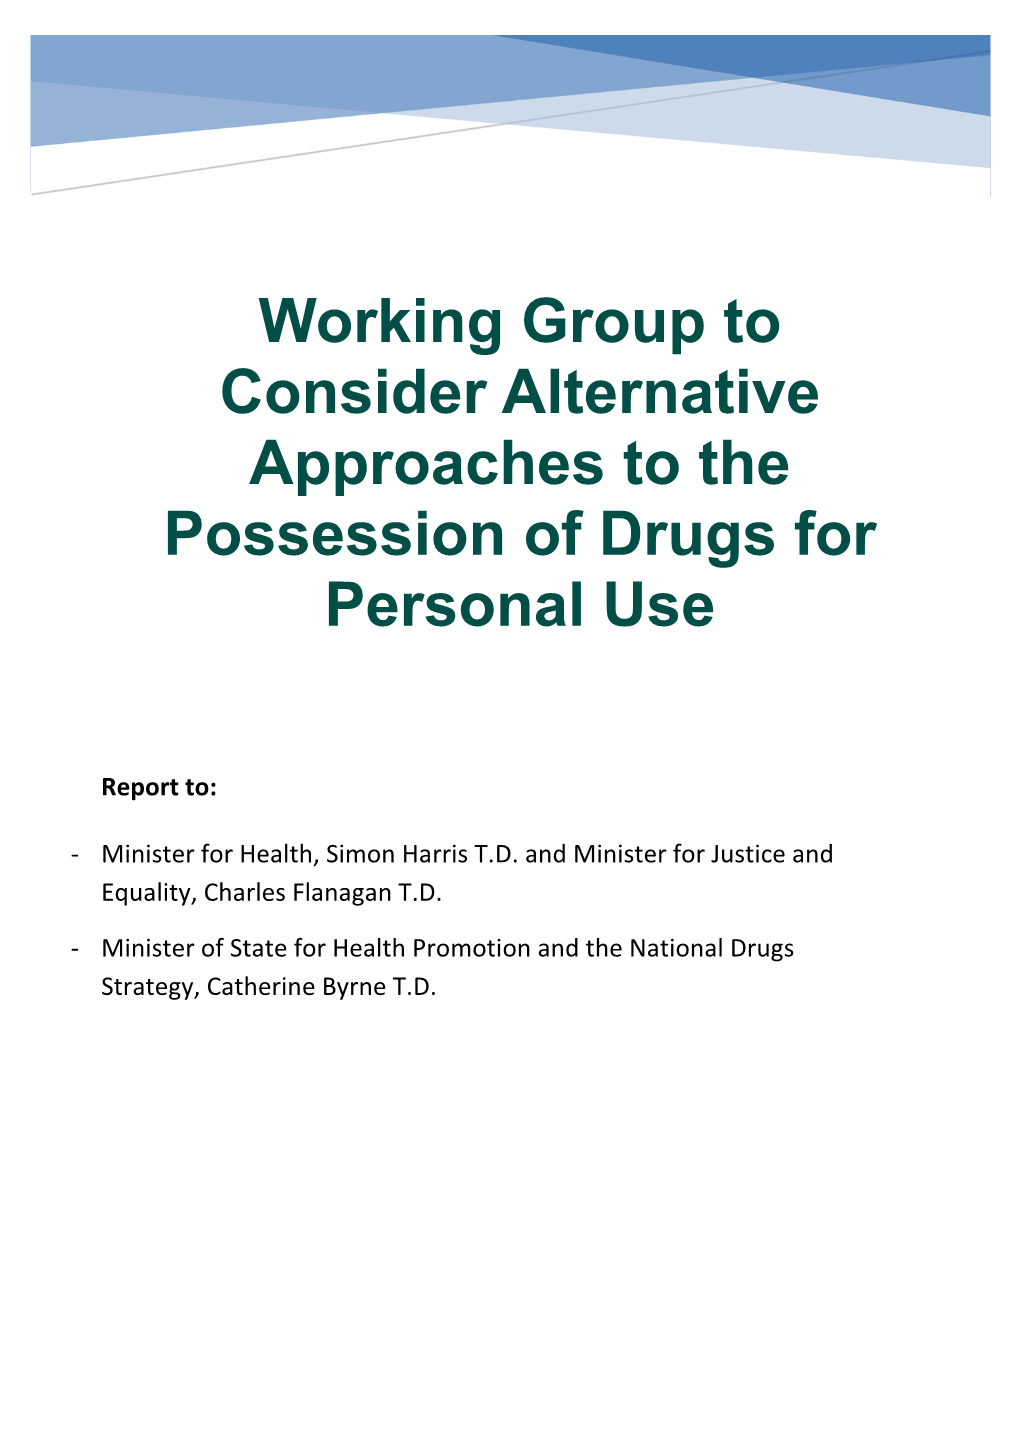 Working Group to Consider Alternative Approaches to the Possession of Drugs for Personal Use